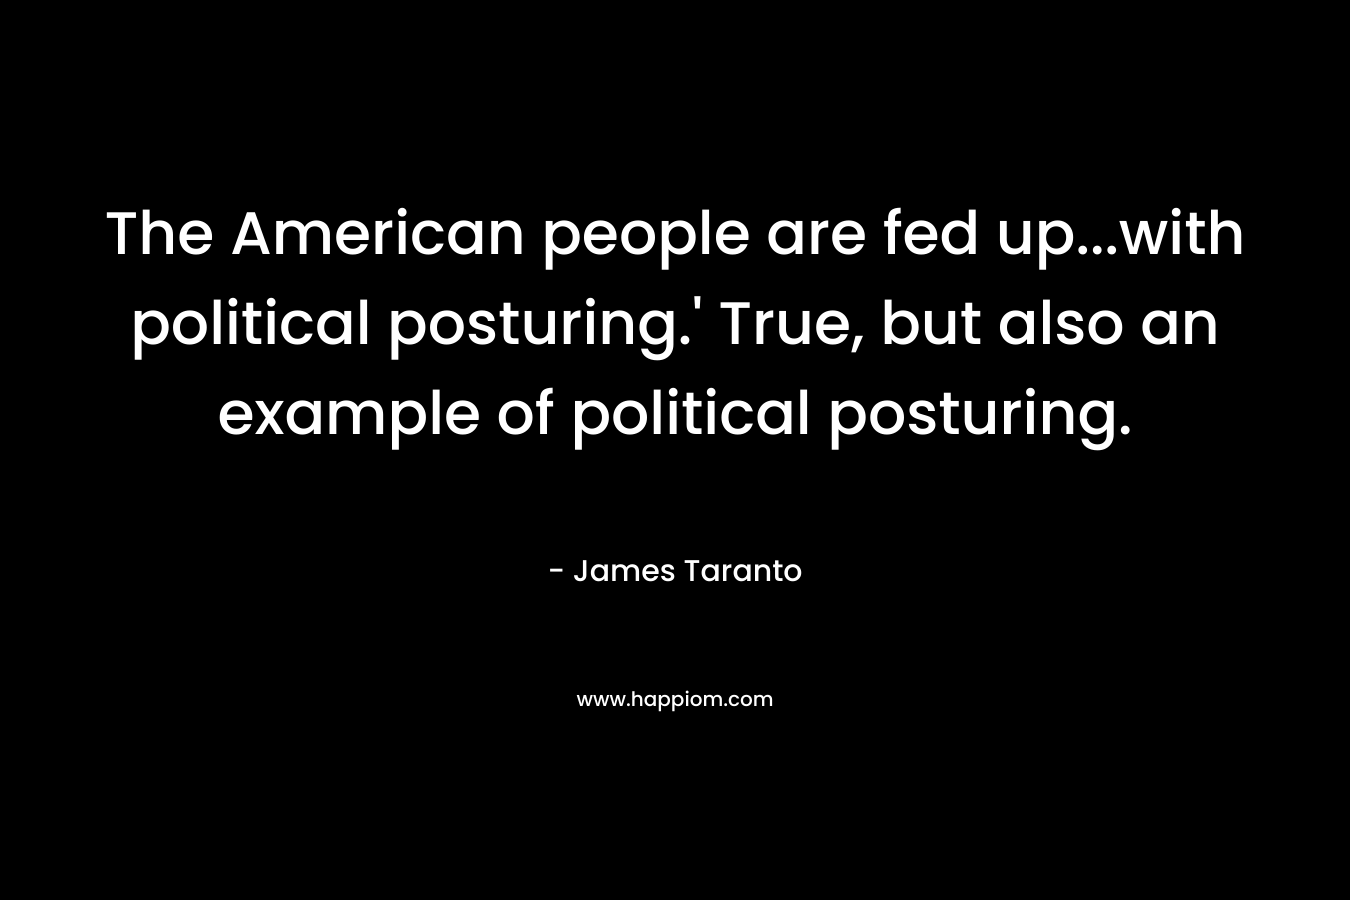 The American people are fed up…with political posturing.’ True, but also an example of political posturing. – James Taranto